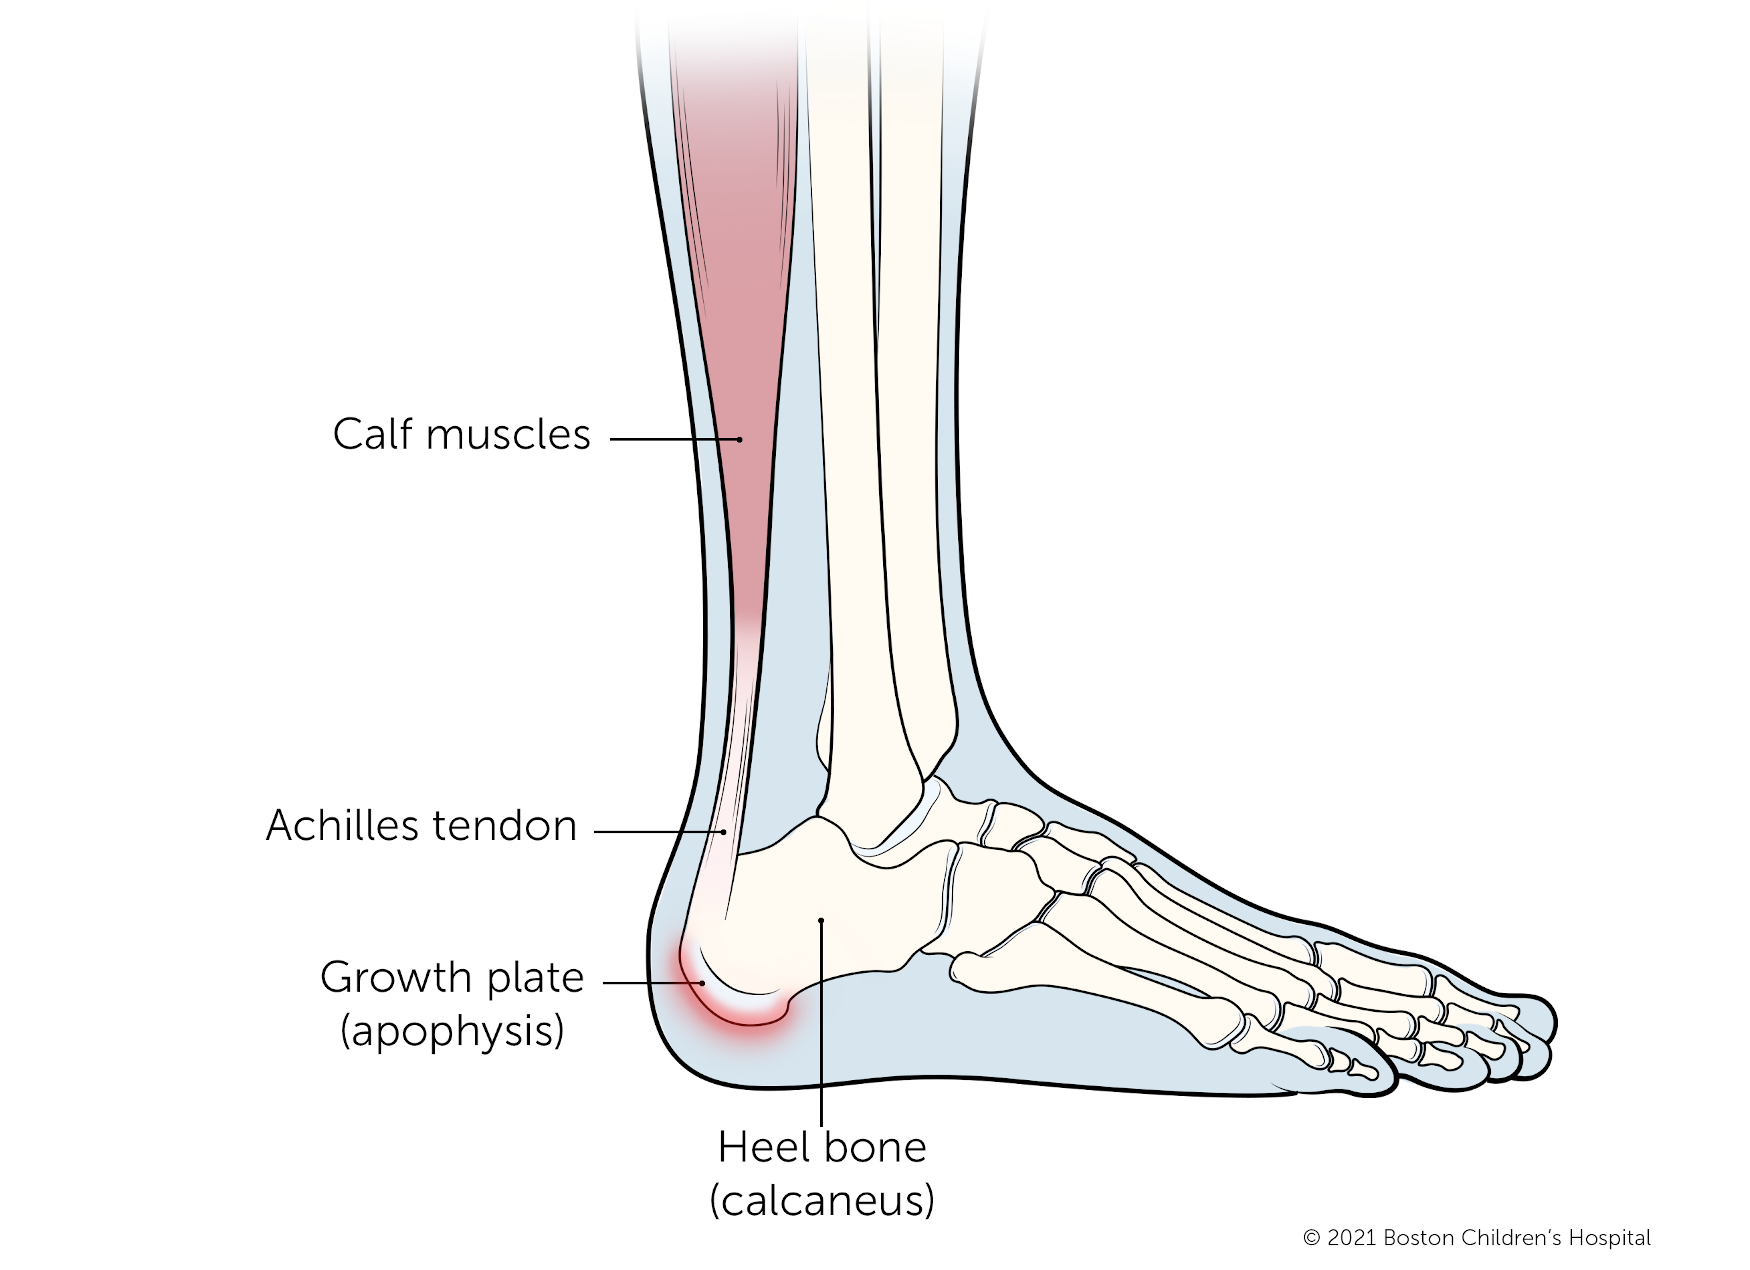 What Causes Chronic Foot and Ankle Pain?